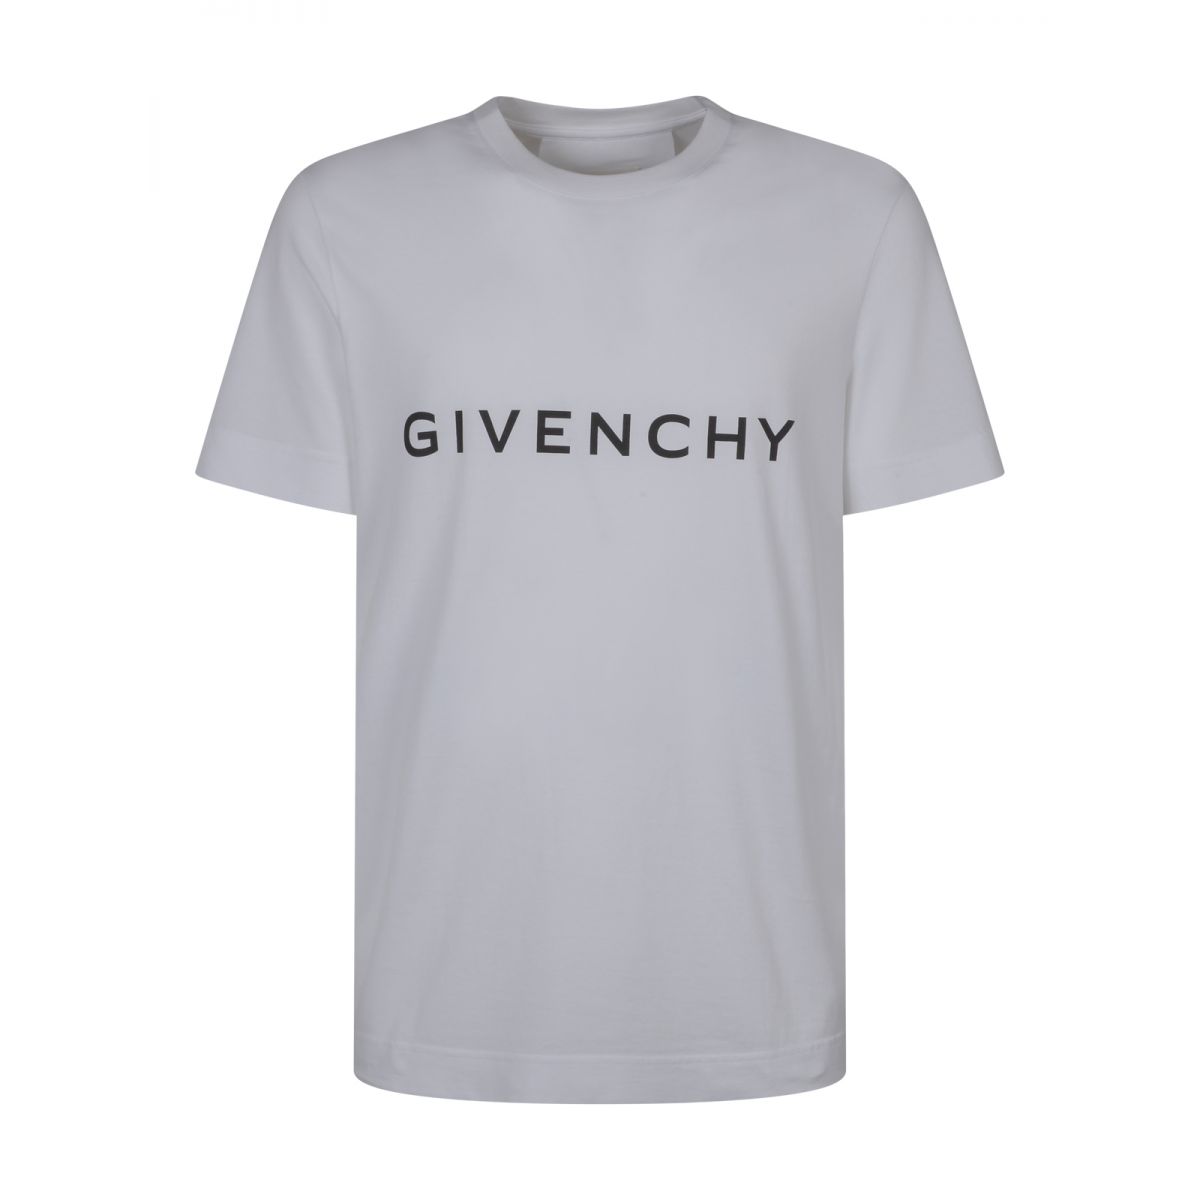 GIVENCHY - Archetype slim fit t-shirt in cotton